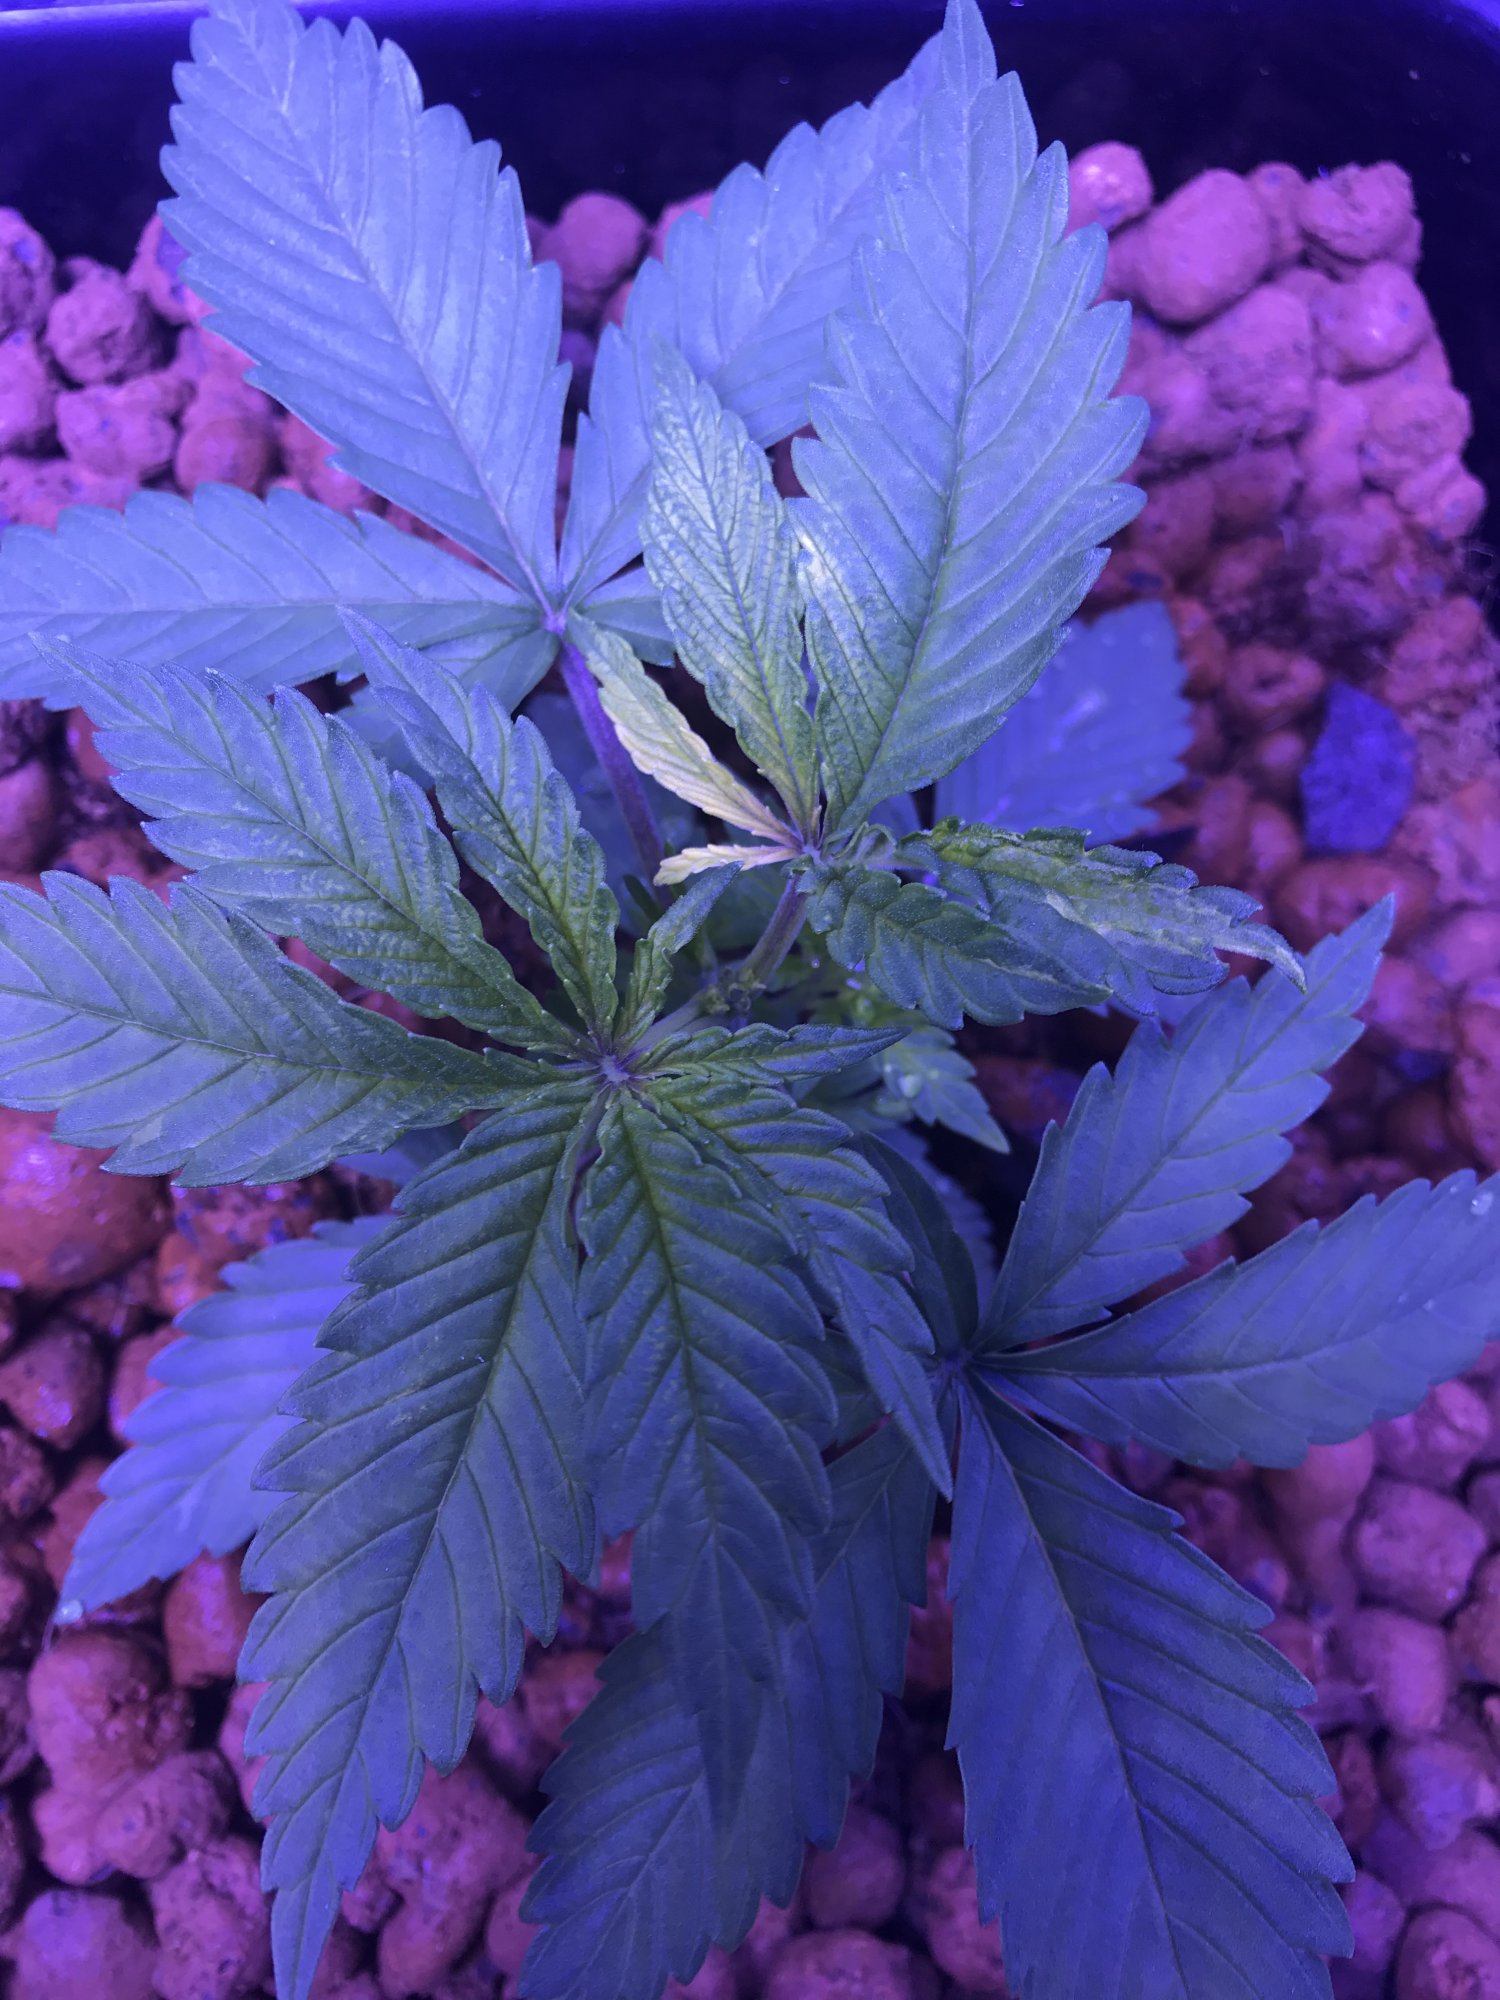 Help diagnosing and fixing nutrient problem